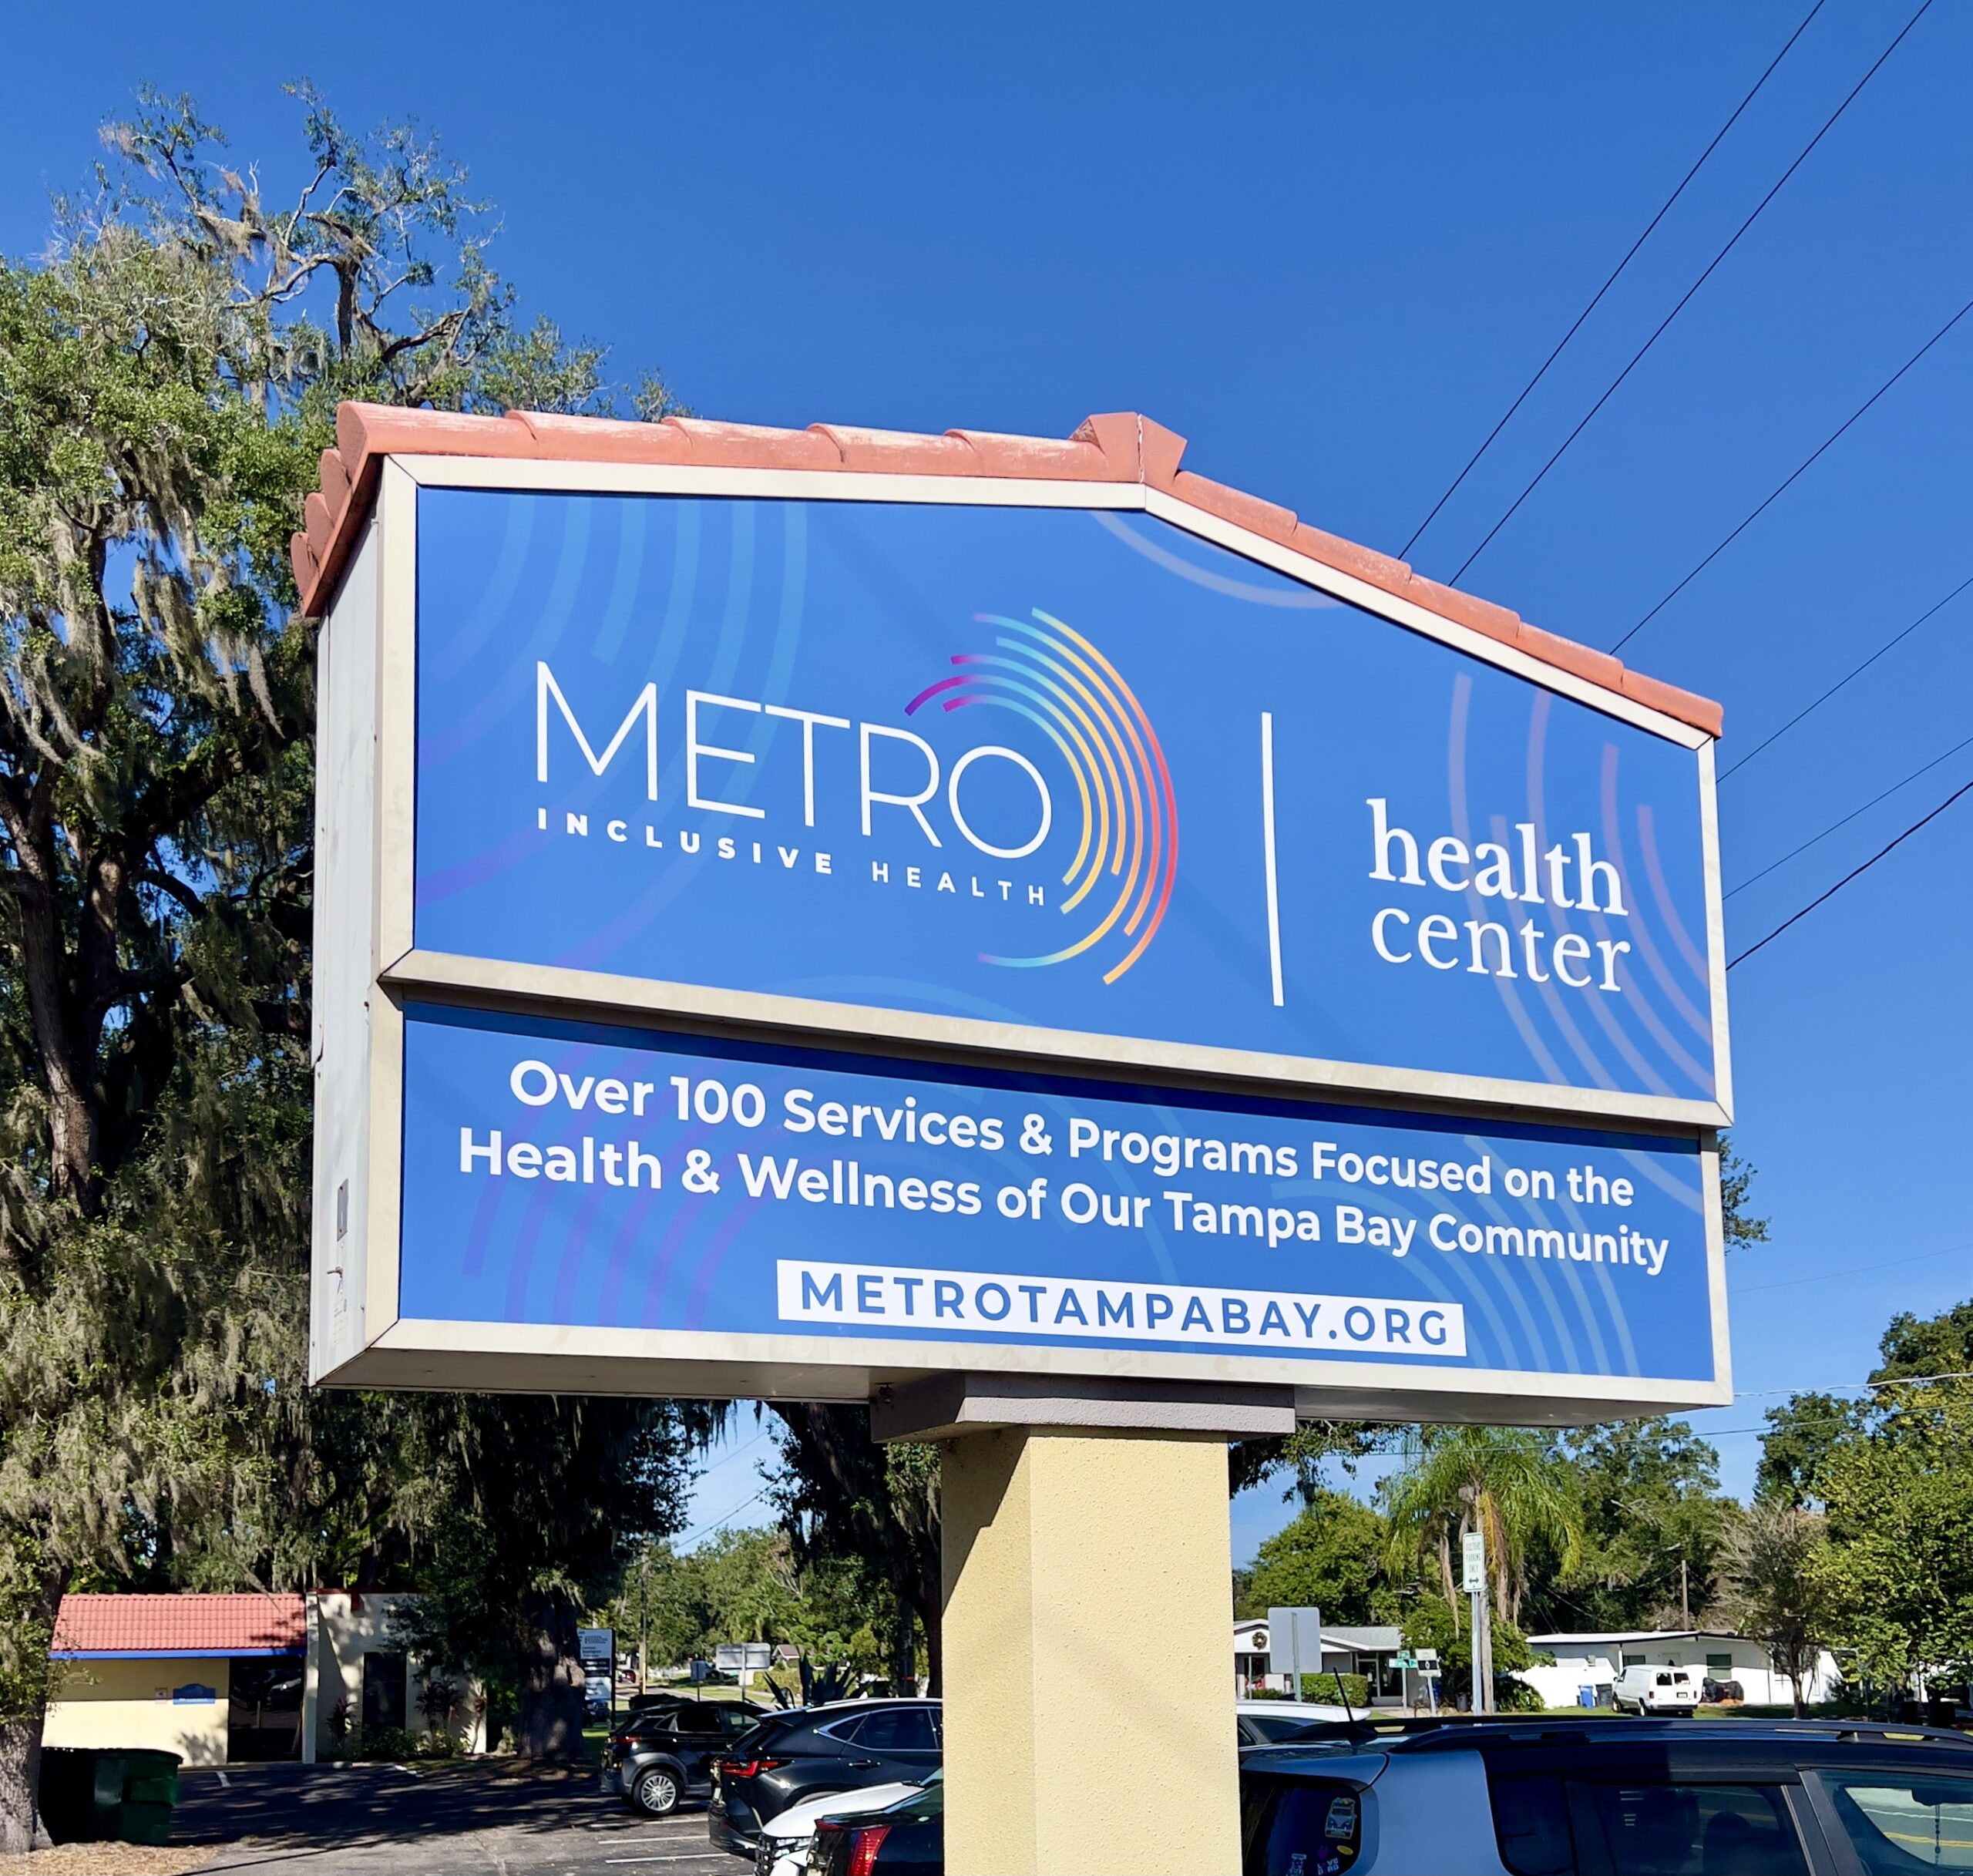 A roadside billboard for METRO Inclusive Health with a clear blue sky in the background. The sign features the METRO logo and reads 'health center' along with the message 'Over 100 Services & Programs Focused on the Health & Wellness of Our Tampa Bay Community' and the website 'METROTAMPABAY.ORG'.